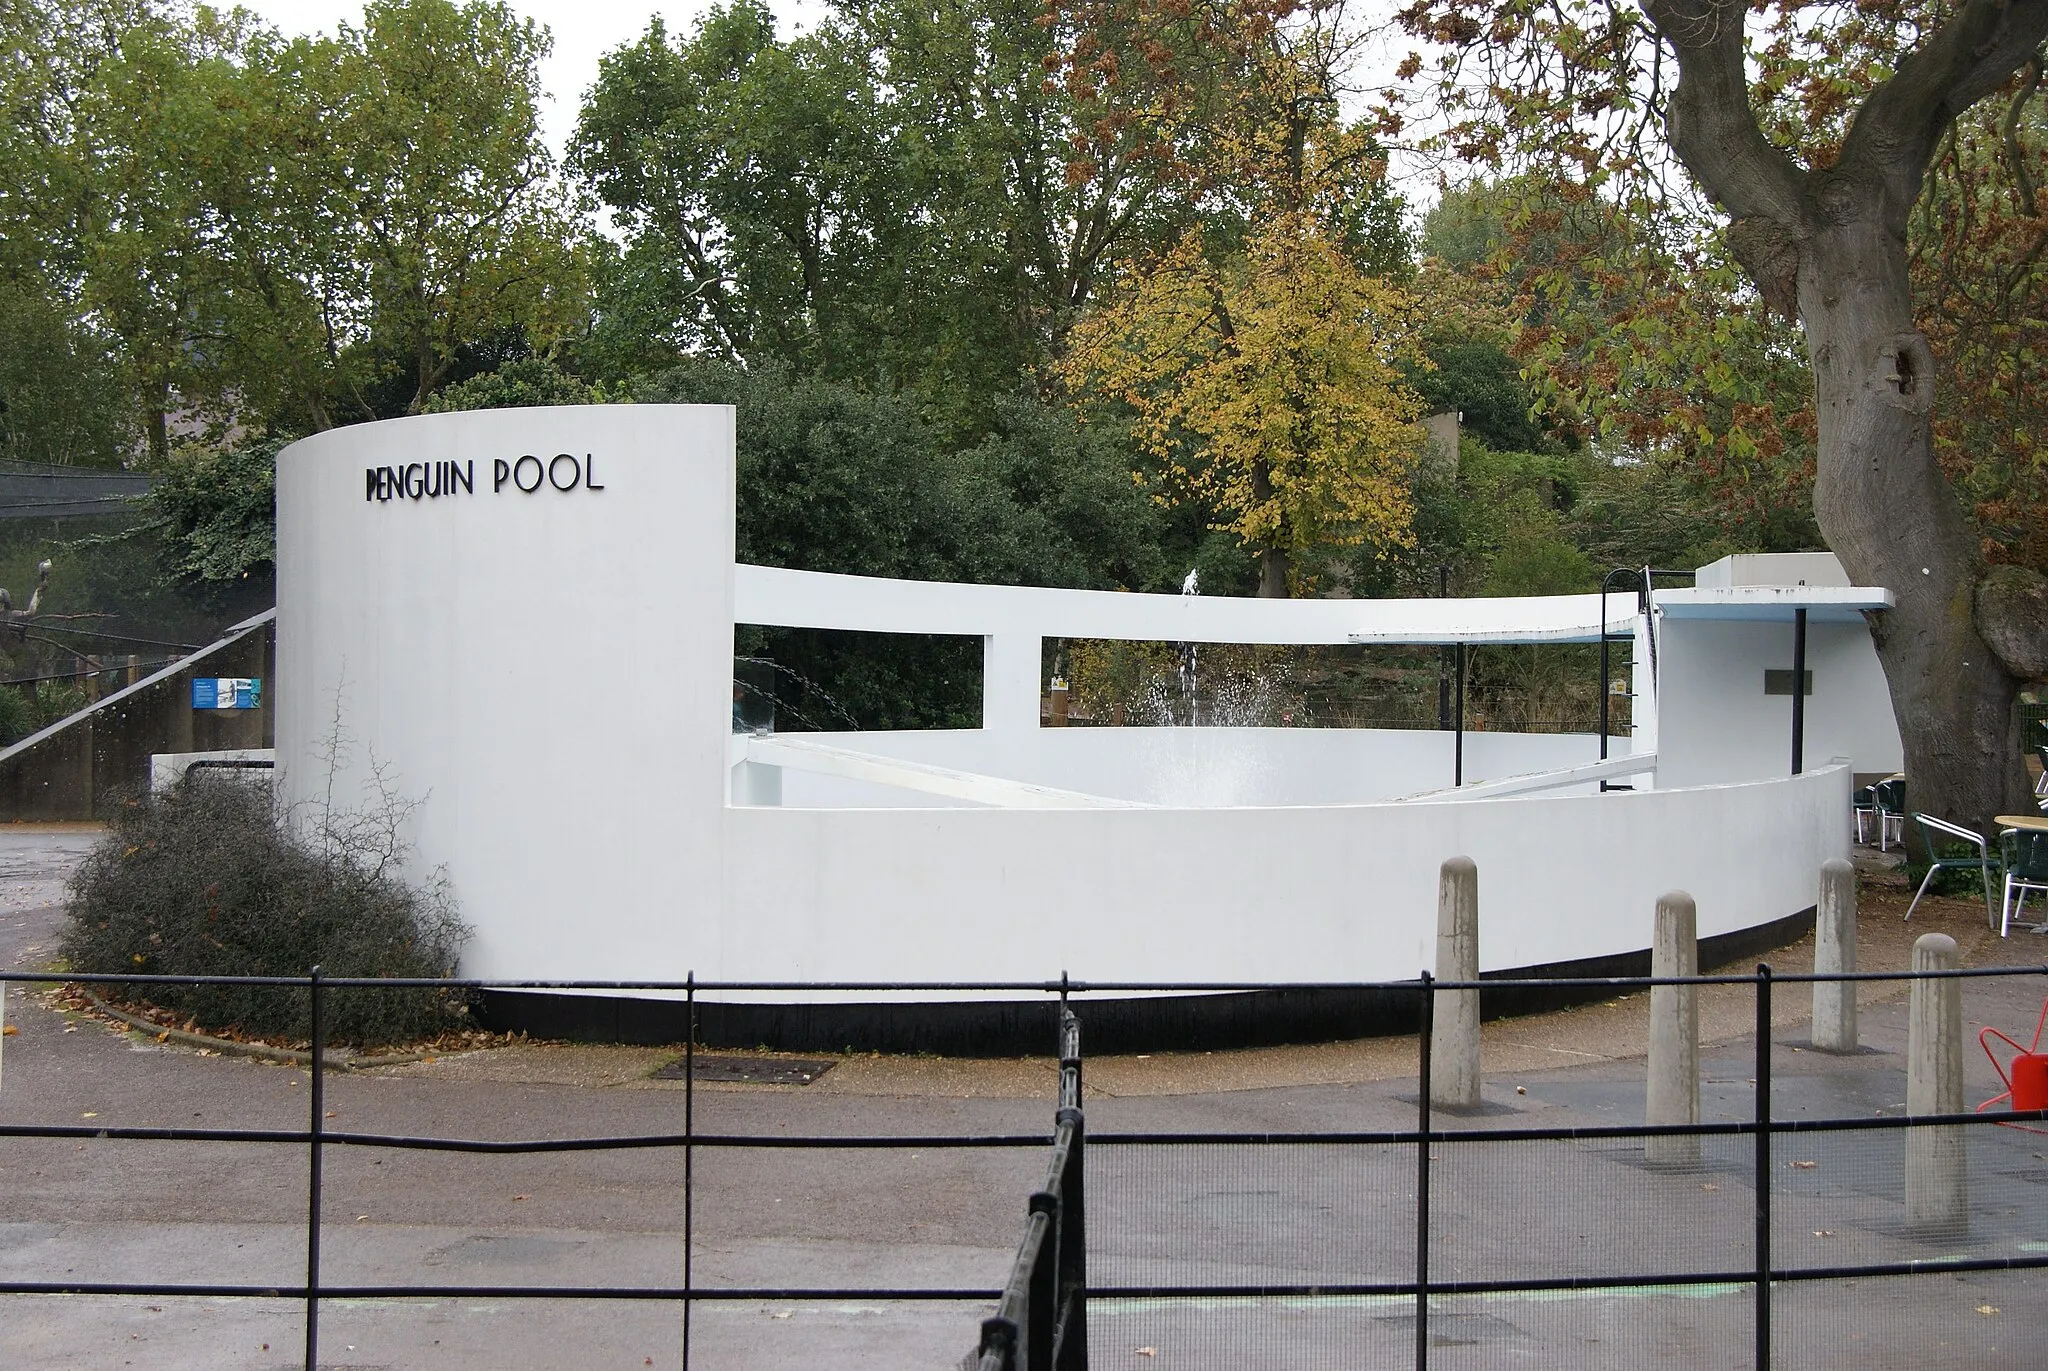 Photo showing: Grade 1 listed Penguin pool, London Zoo, England. Now a water feature and not used to keep Penguins.